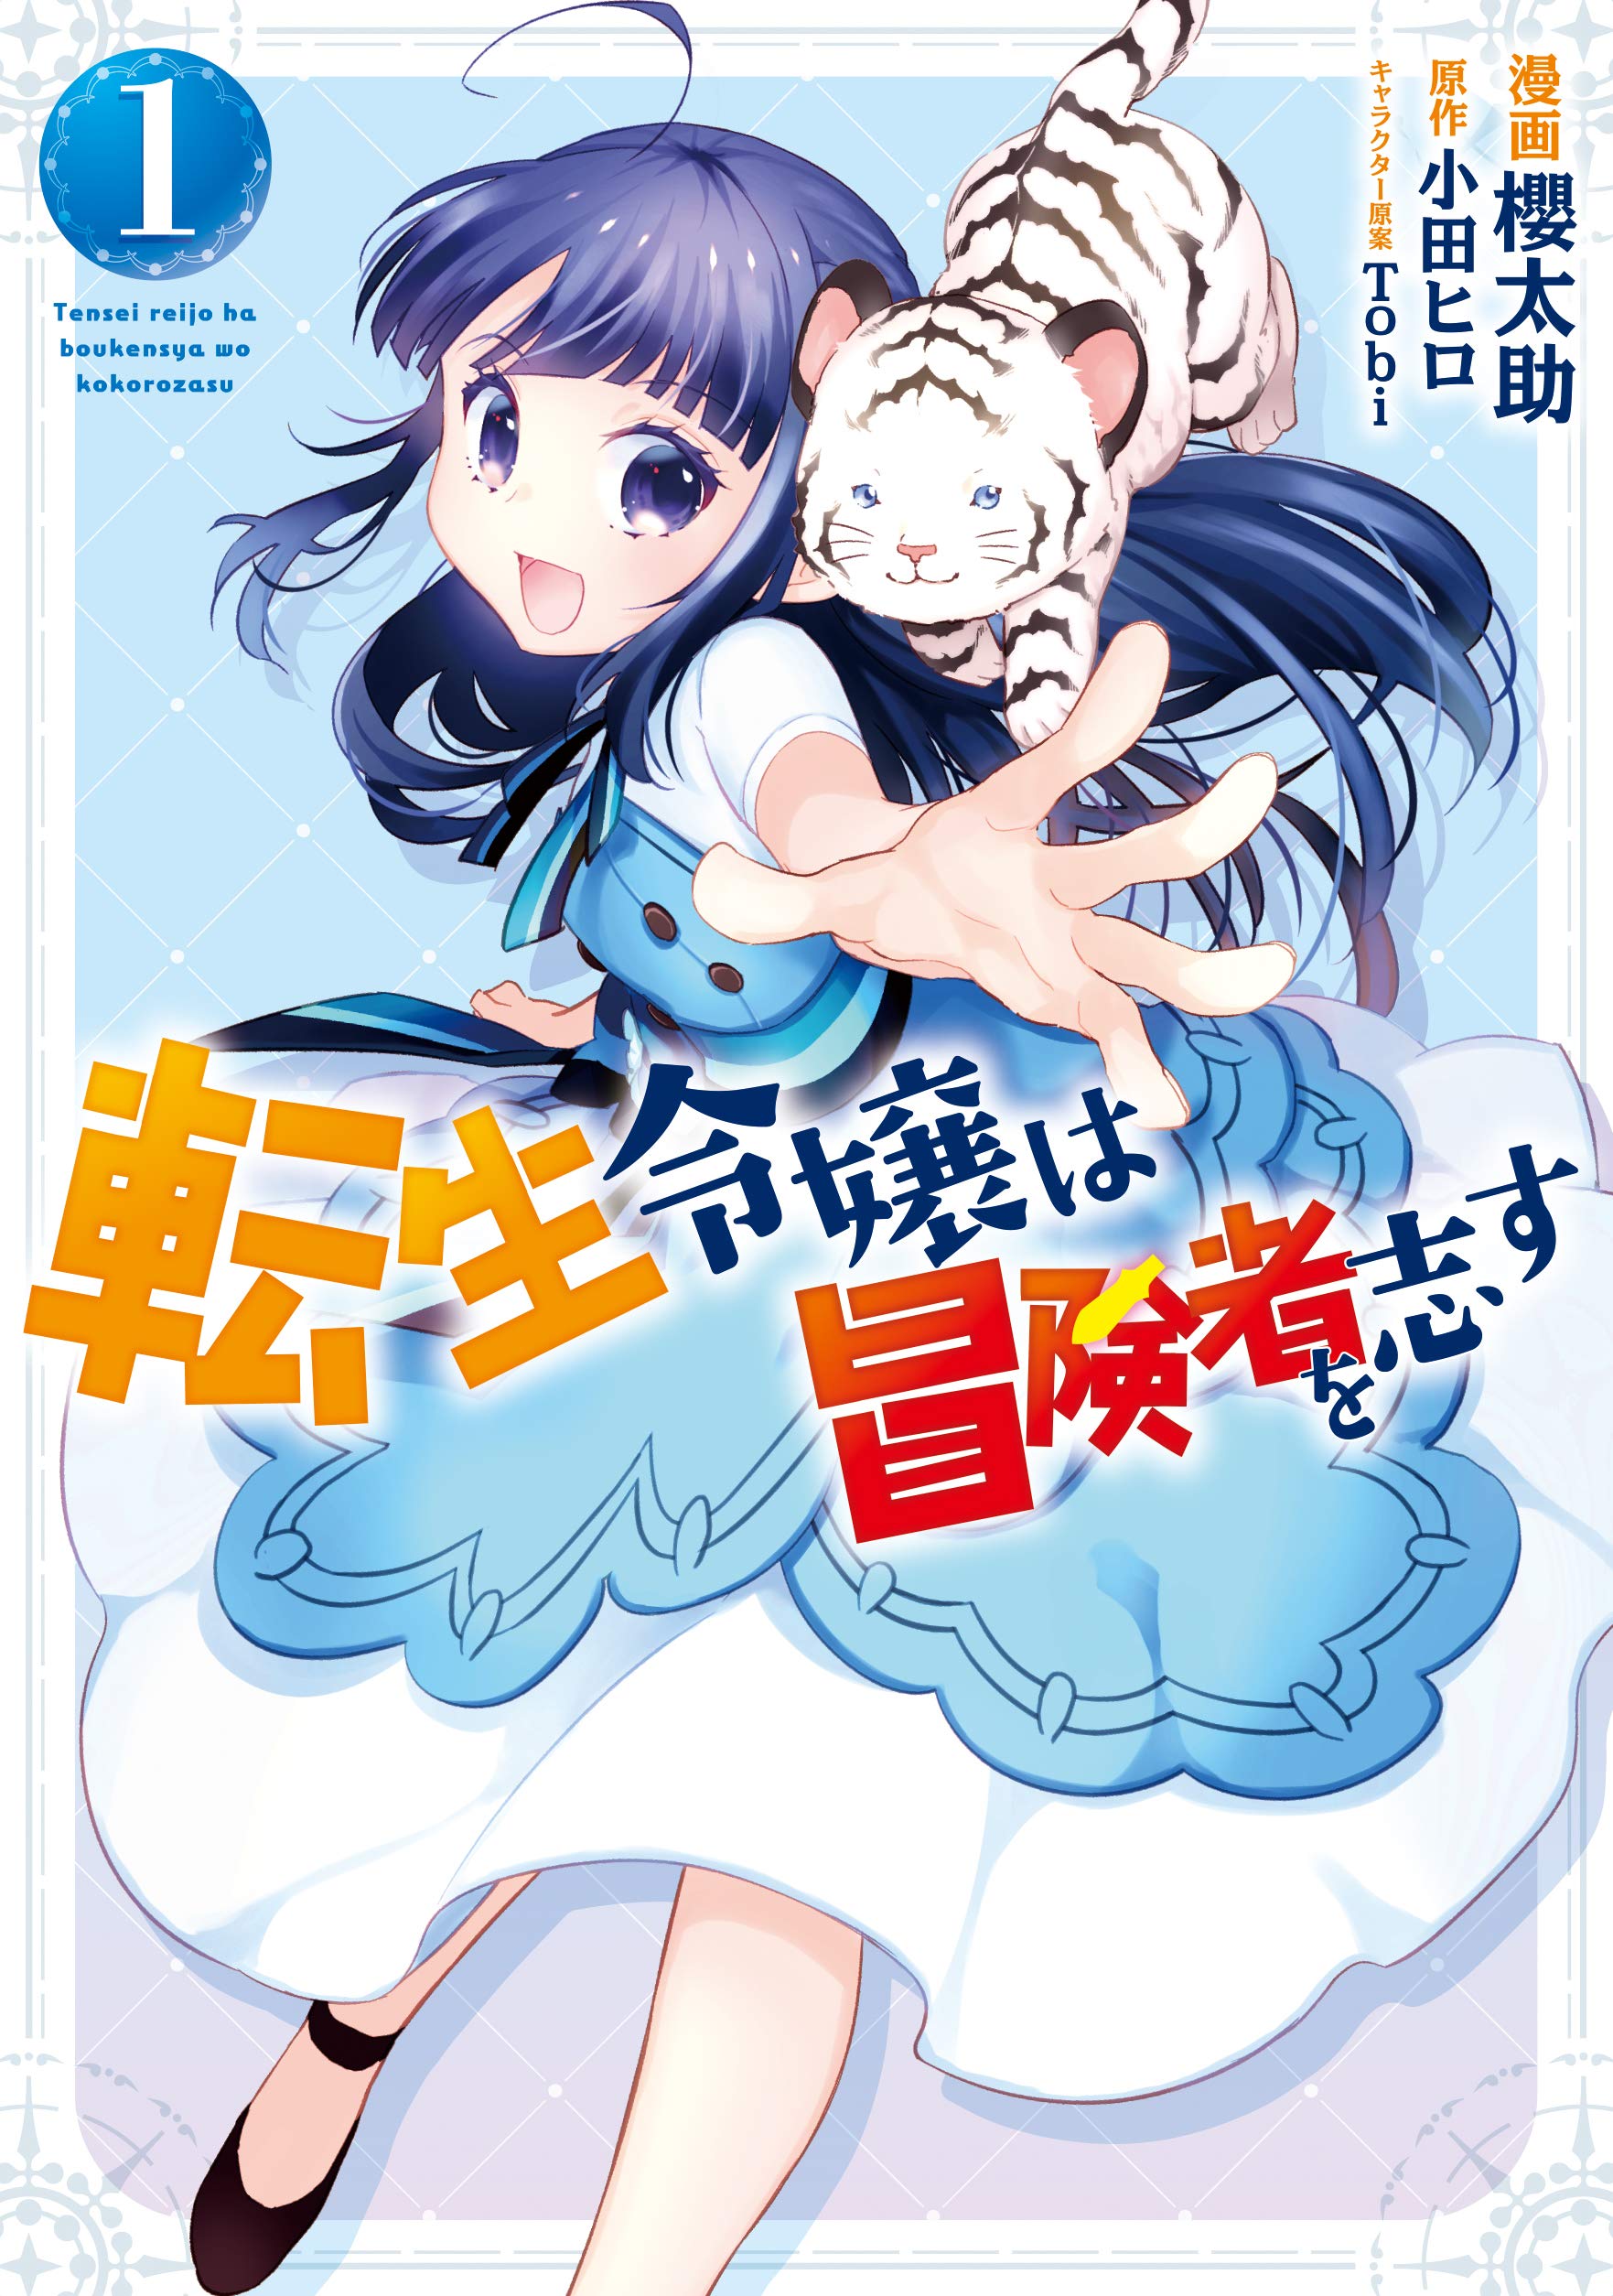 I'll Resign And Have A Fresh Start In This World Manga - Read the